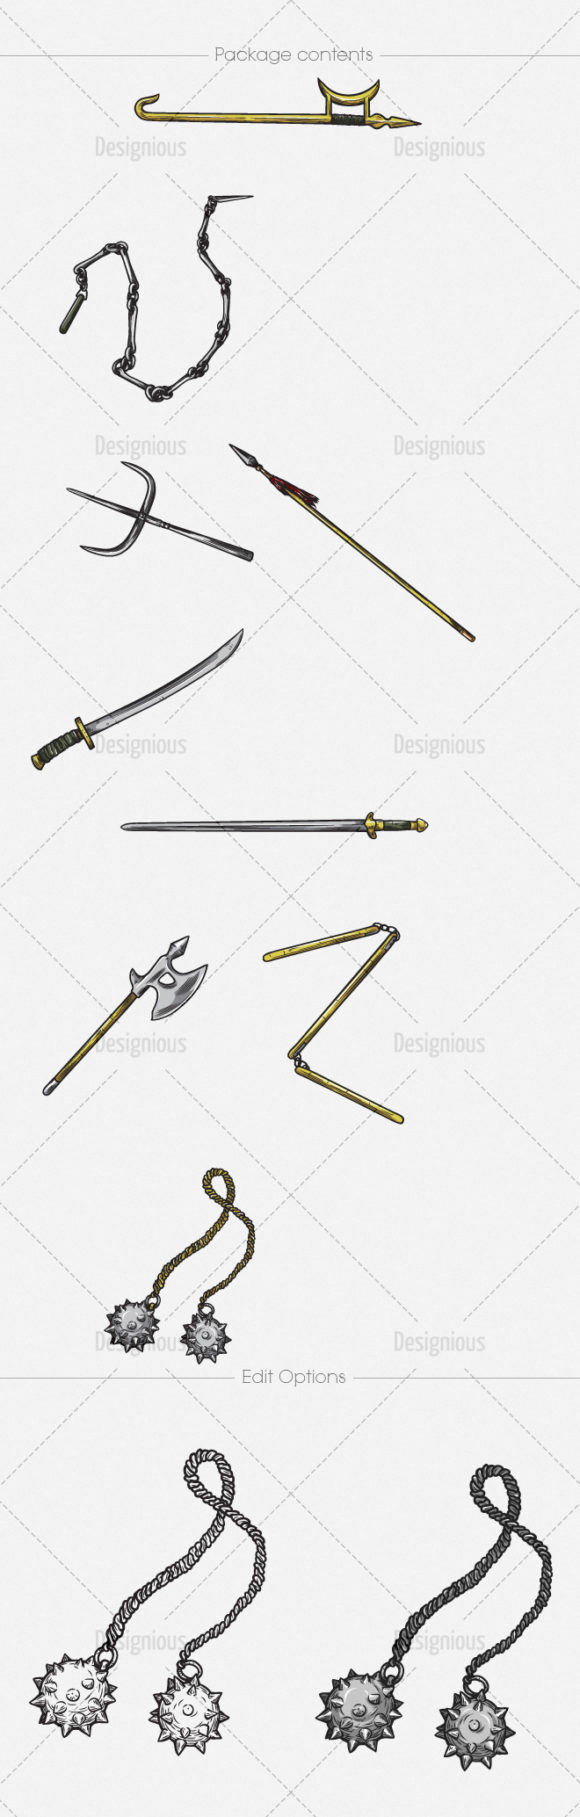 Chinese Weapons Vector Pack 1 2